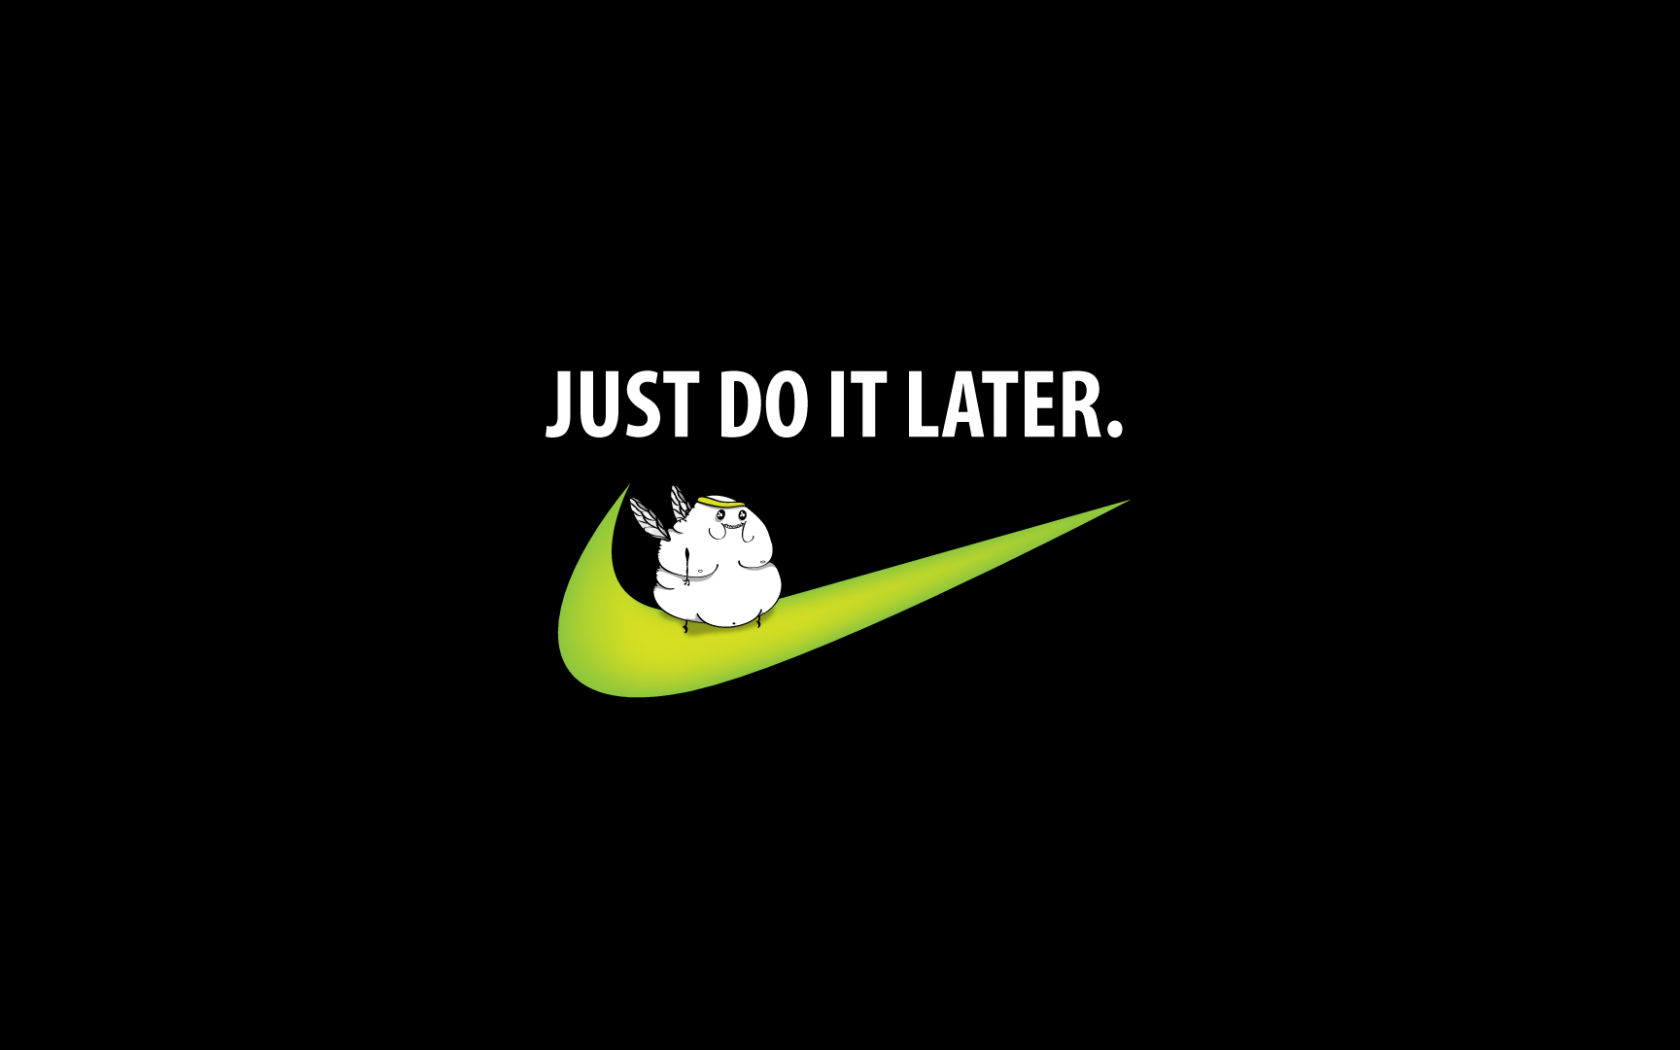 Nike Motivational Quotes Wallpaper Just Do It Later